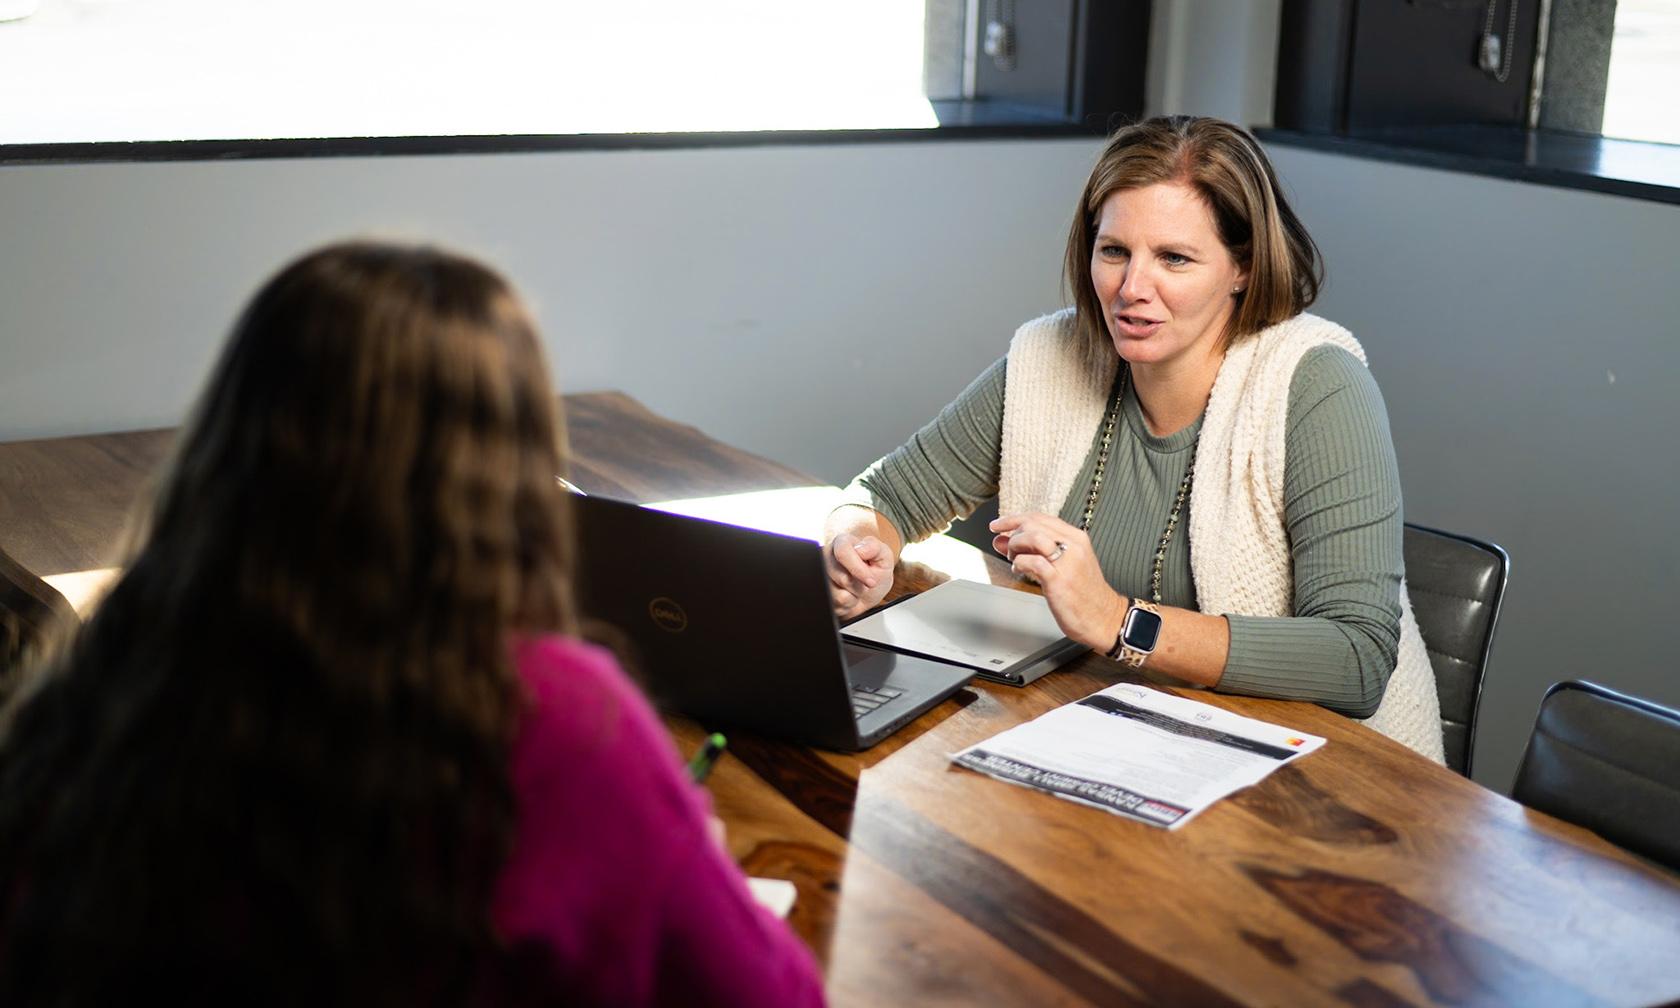 A business counselor talking with a client at a laptop